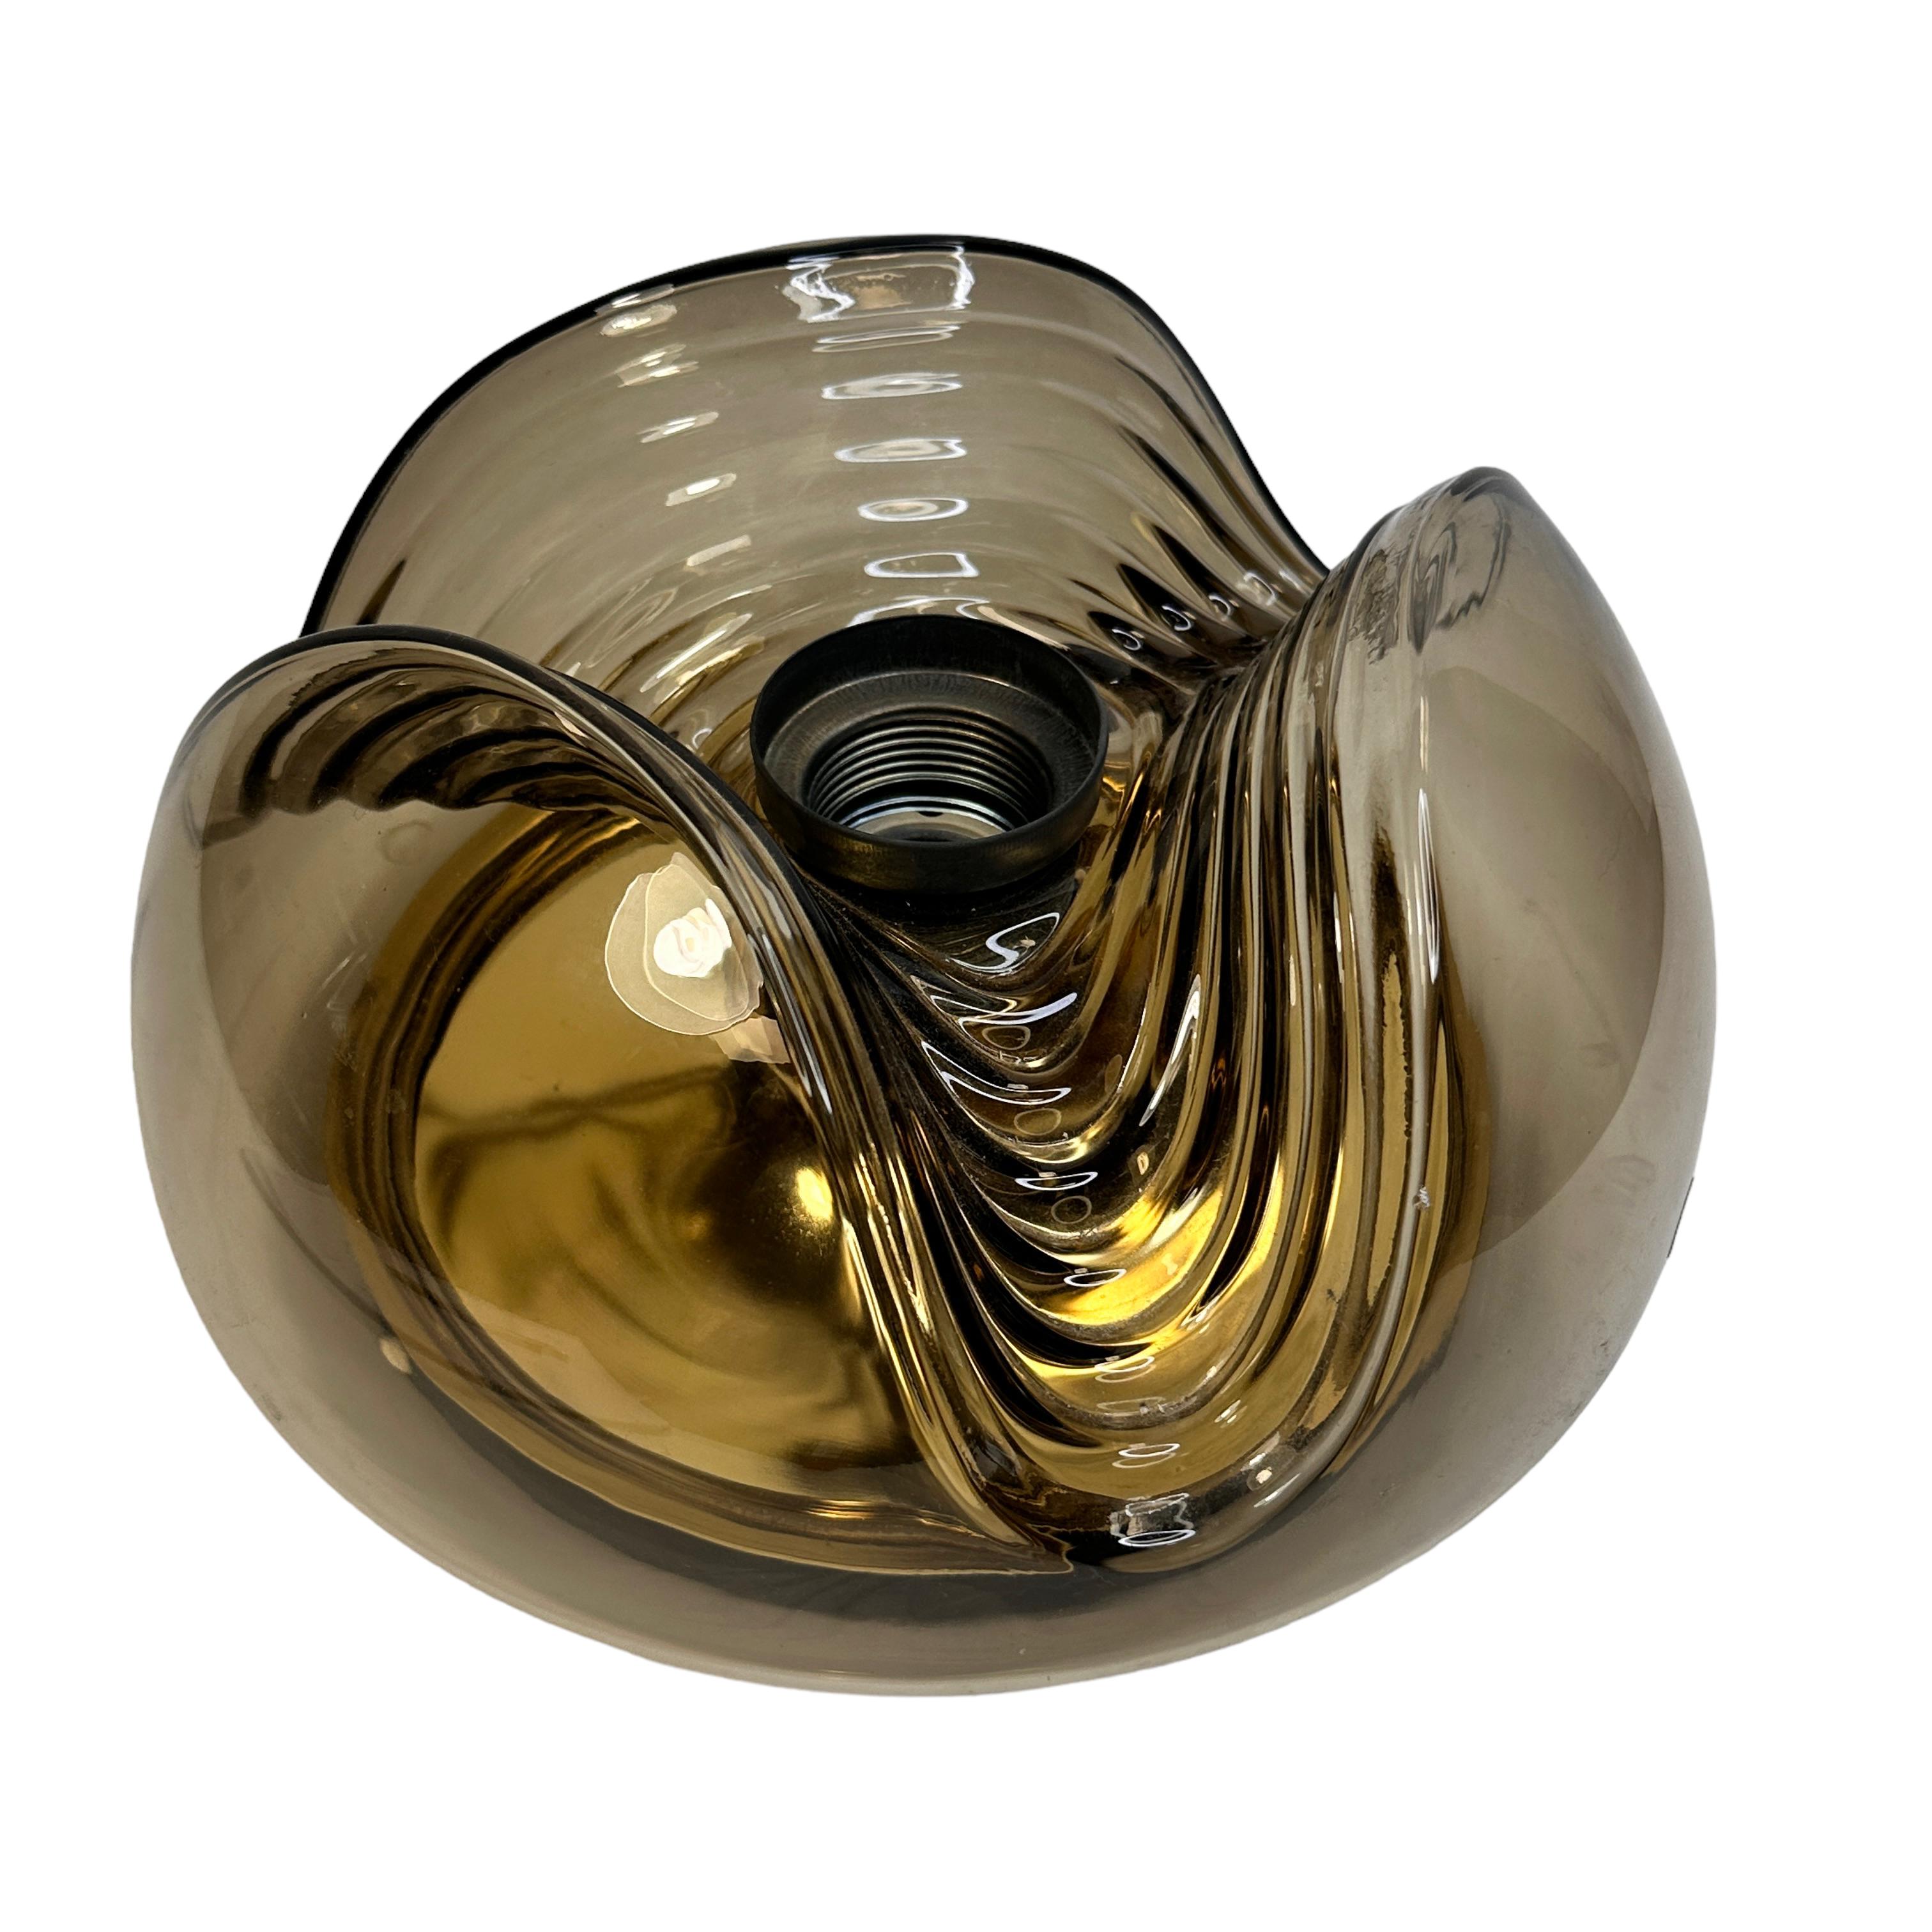 A nice Peill & Putzler amber glass wave Flush mount or sconce / wall light. Made by Peill and Putzler Germany, design by Koch and Lowy. The fixture requires one European E27 Edison bulb, up to 100 watts. A nice addition to any room. Found at an